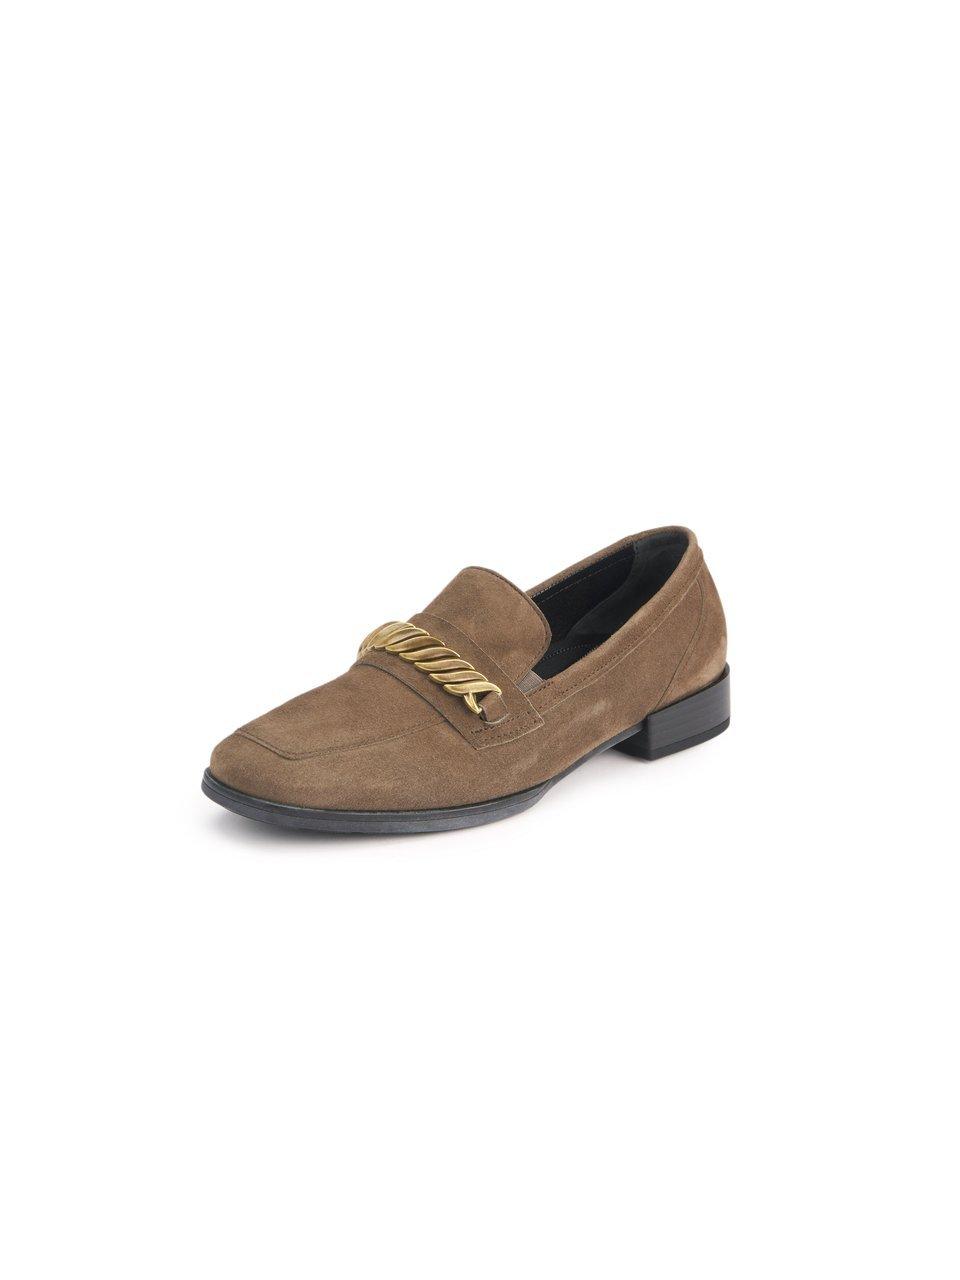 Gabor dames loafer - Taupe - Maat 38